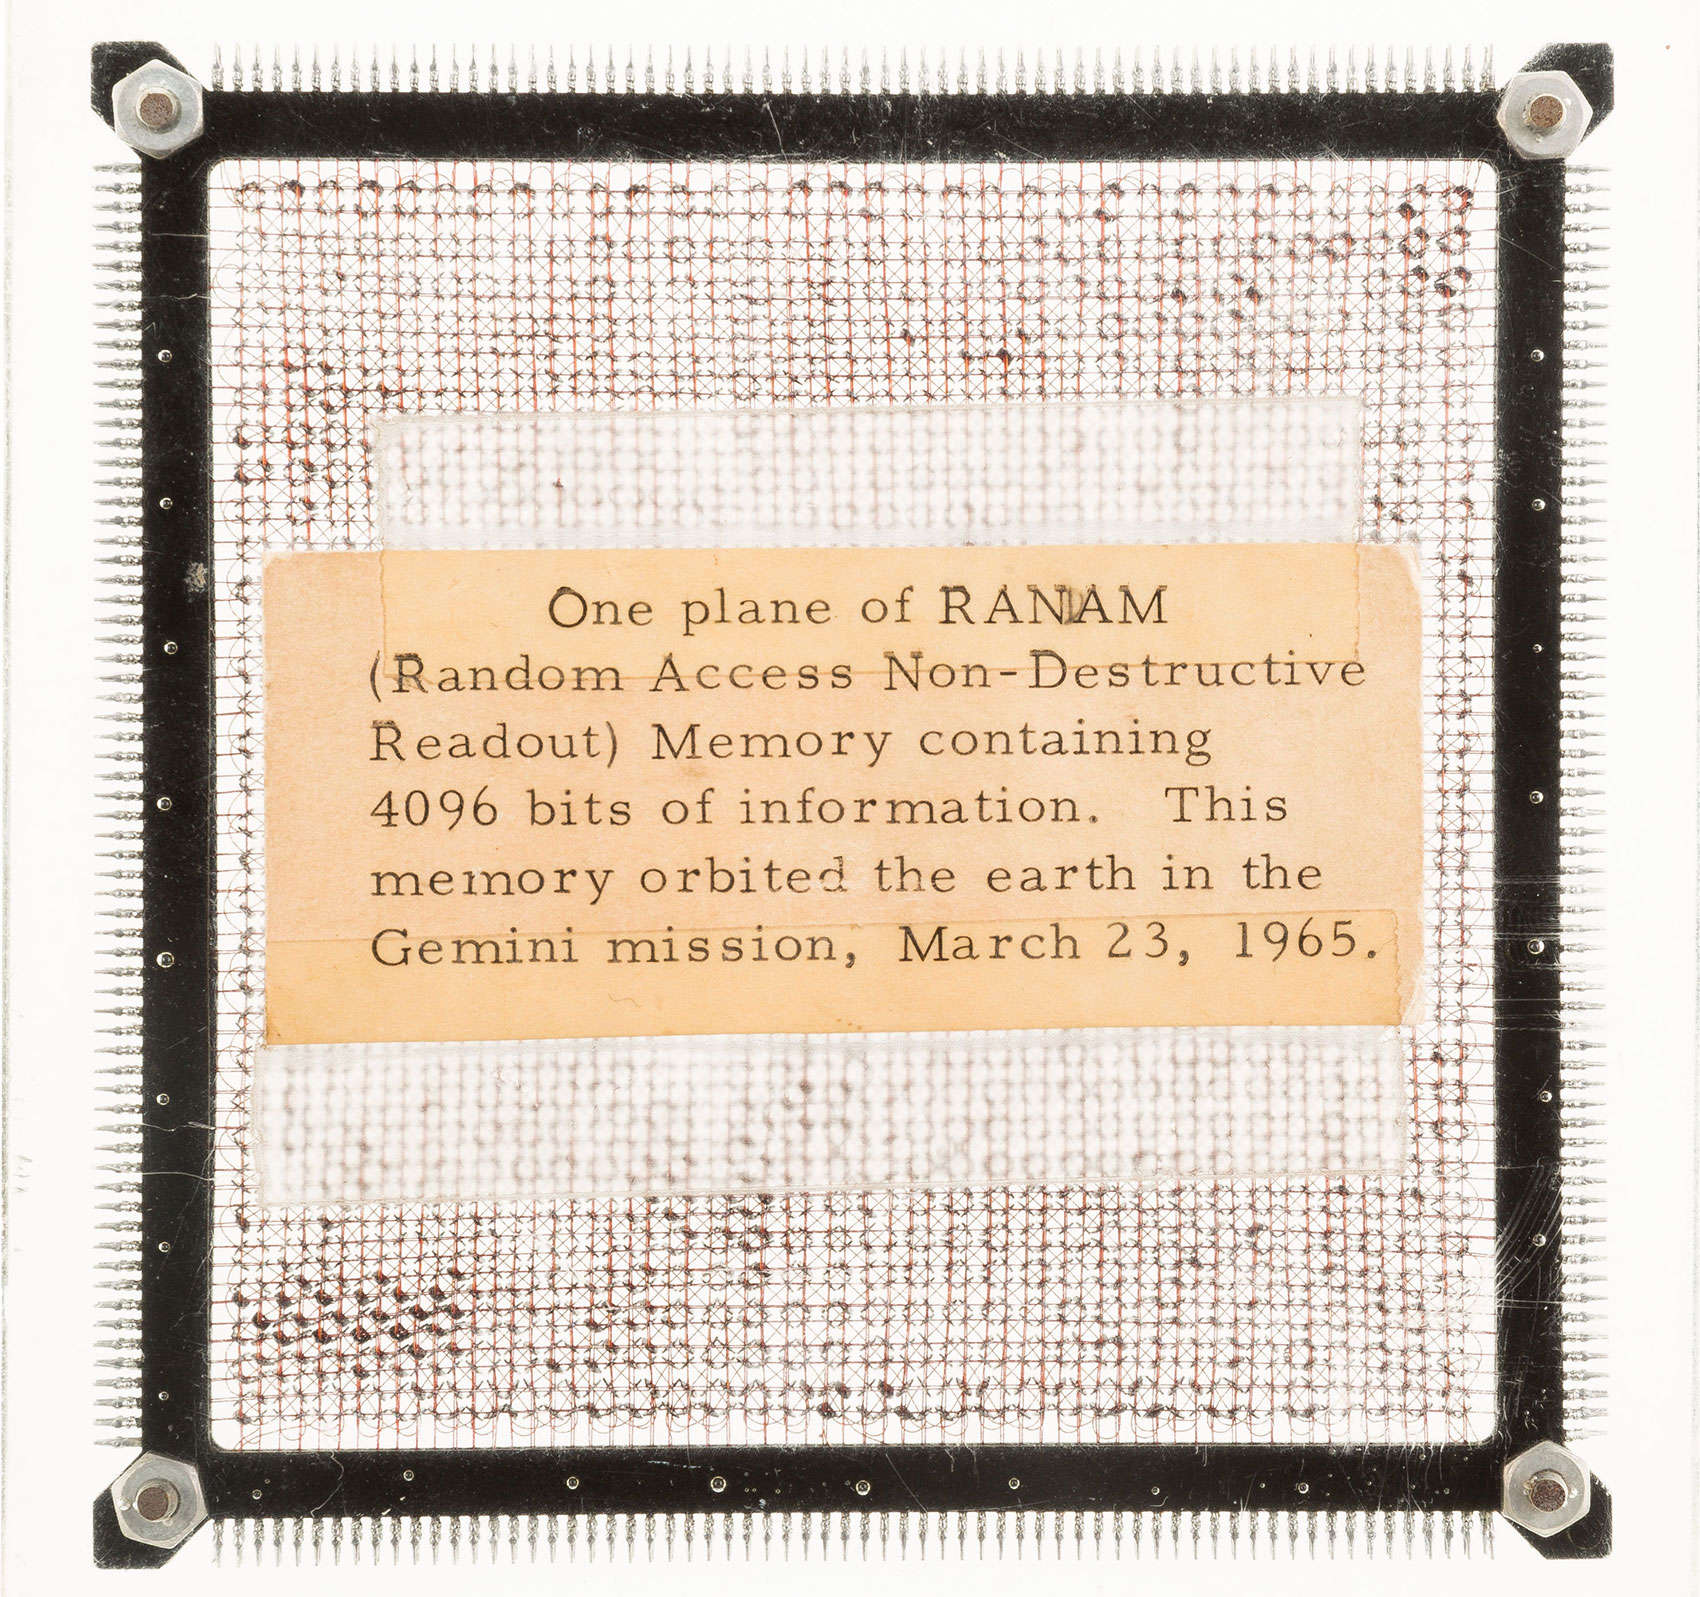 This computer chip is from the first computer ever used in a spacecraft.